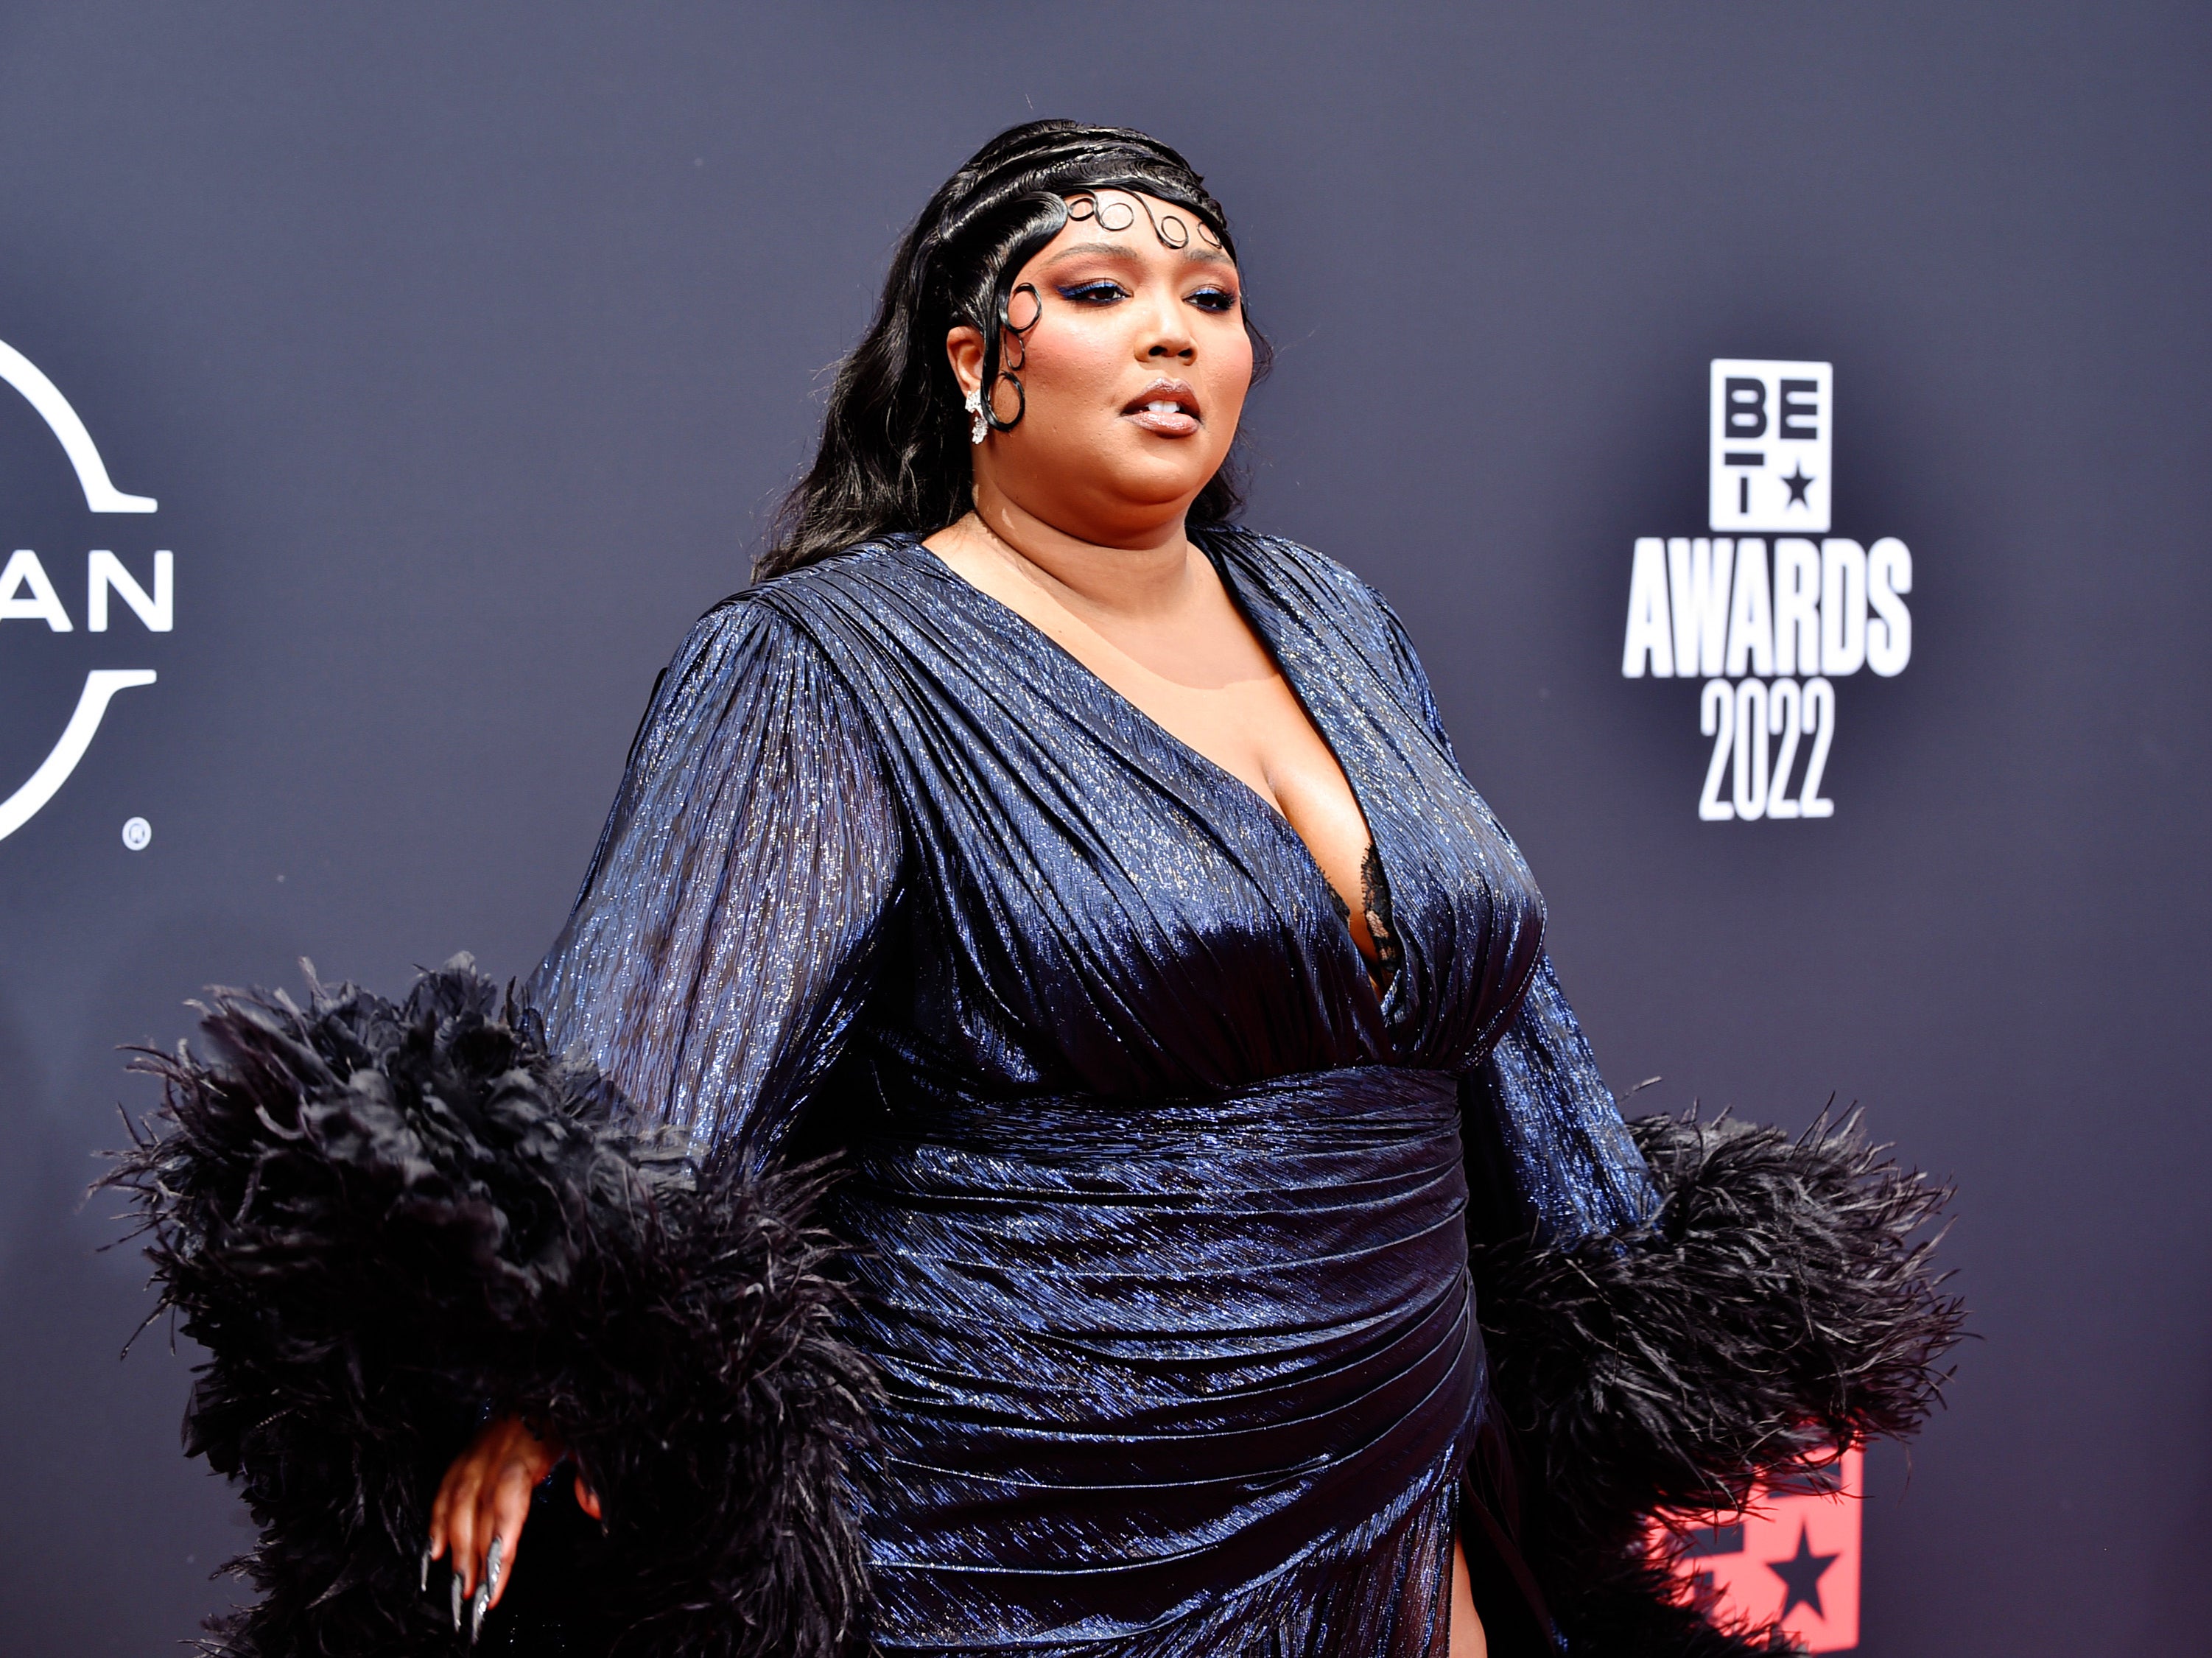 Lizzo released her latest album ‘Special’ in July 2022